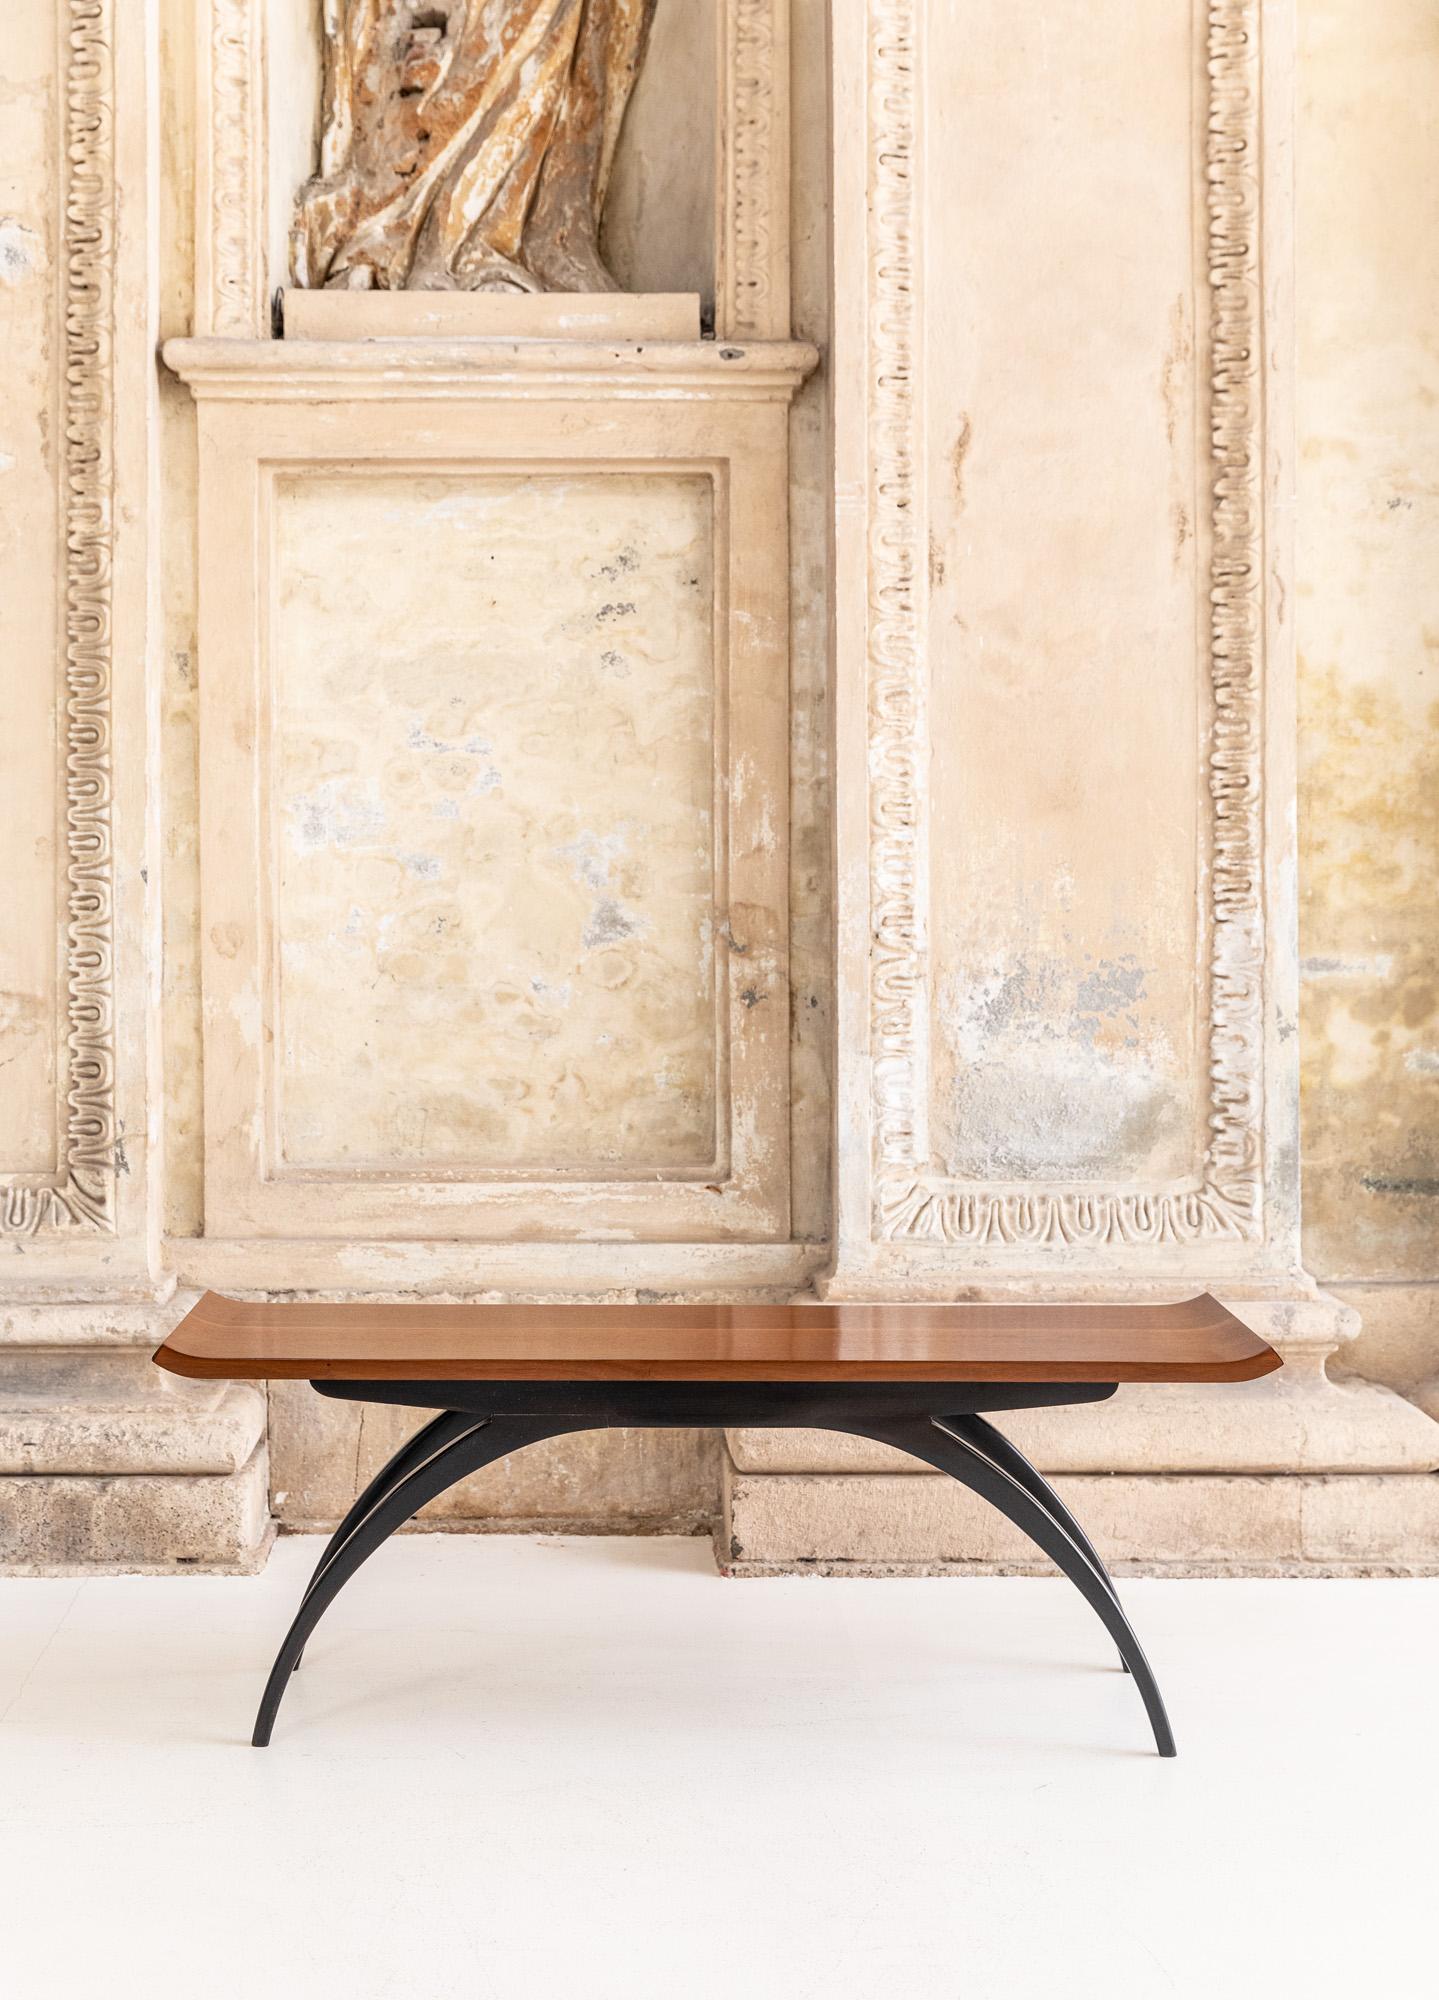 Extraordinary coffee table with elegant legs and shaped wood top.
Attributed to Guglielmo Ulrich for this elegant shaped form.
It can be used as bench.